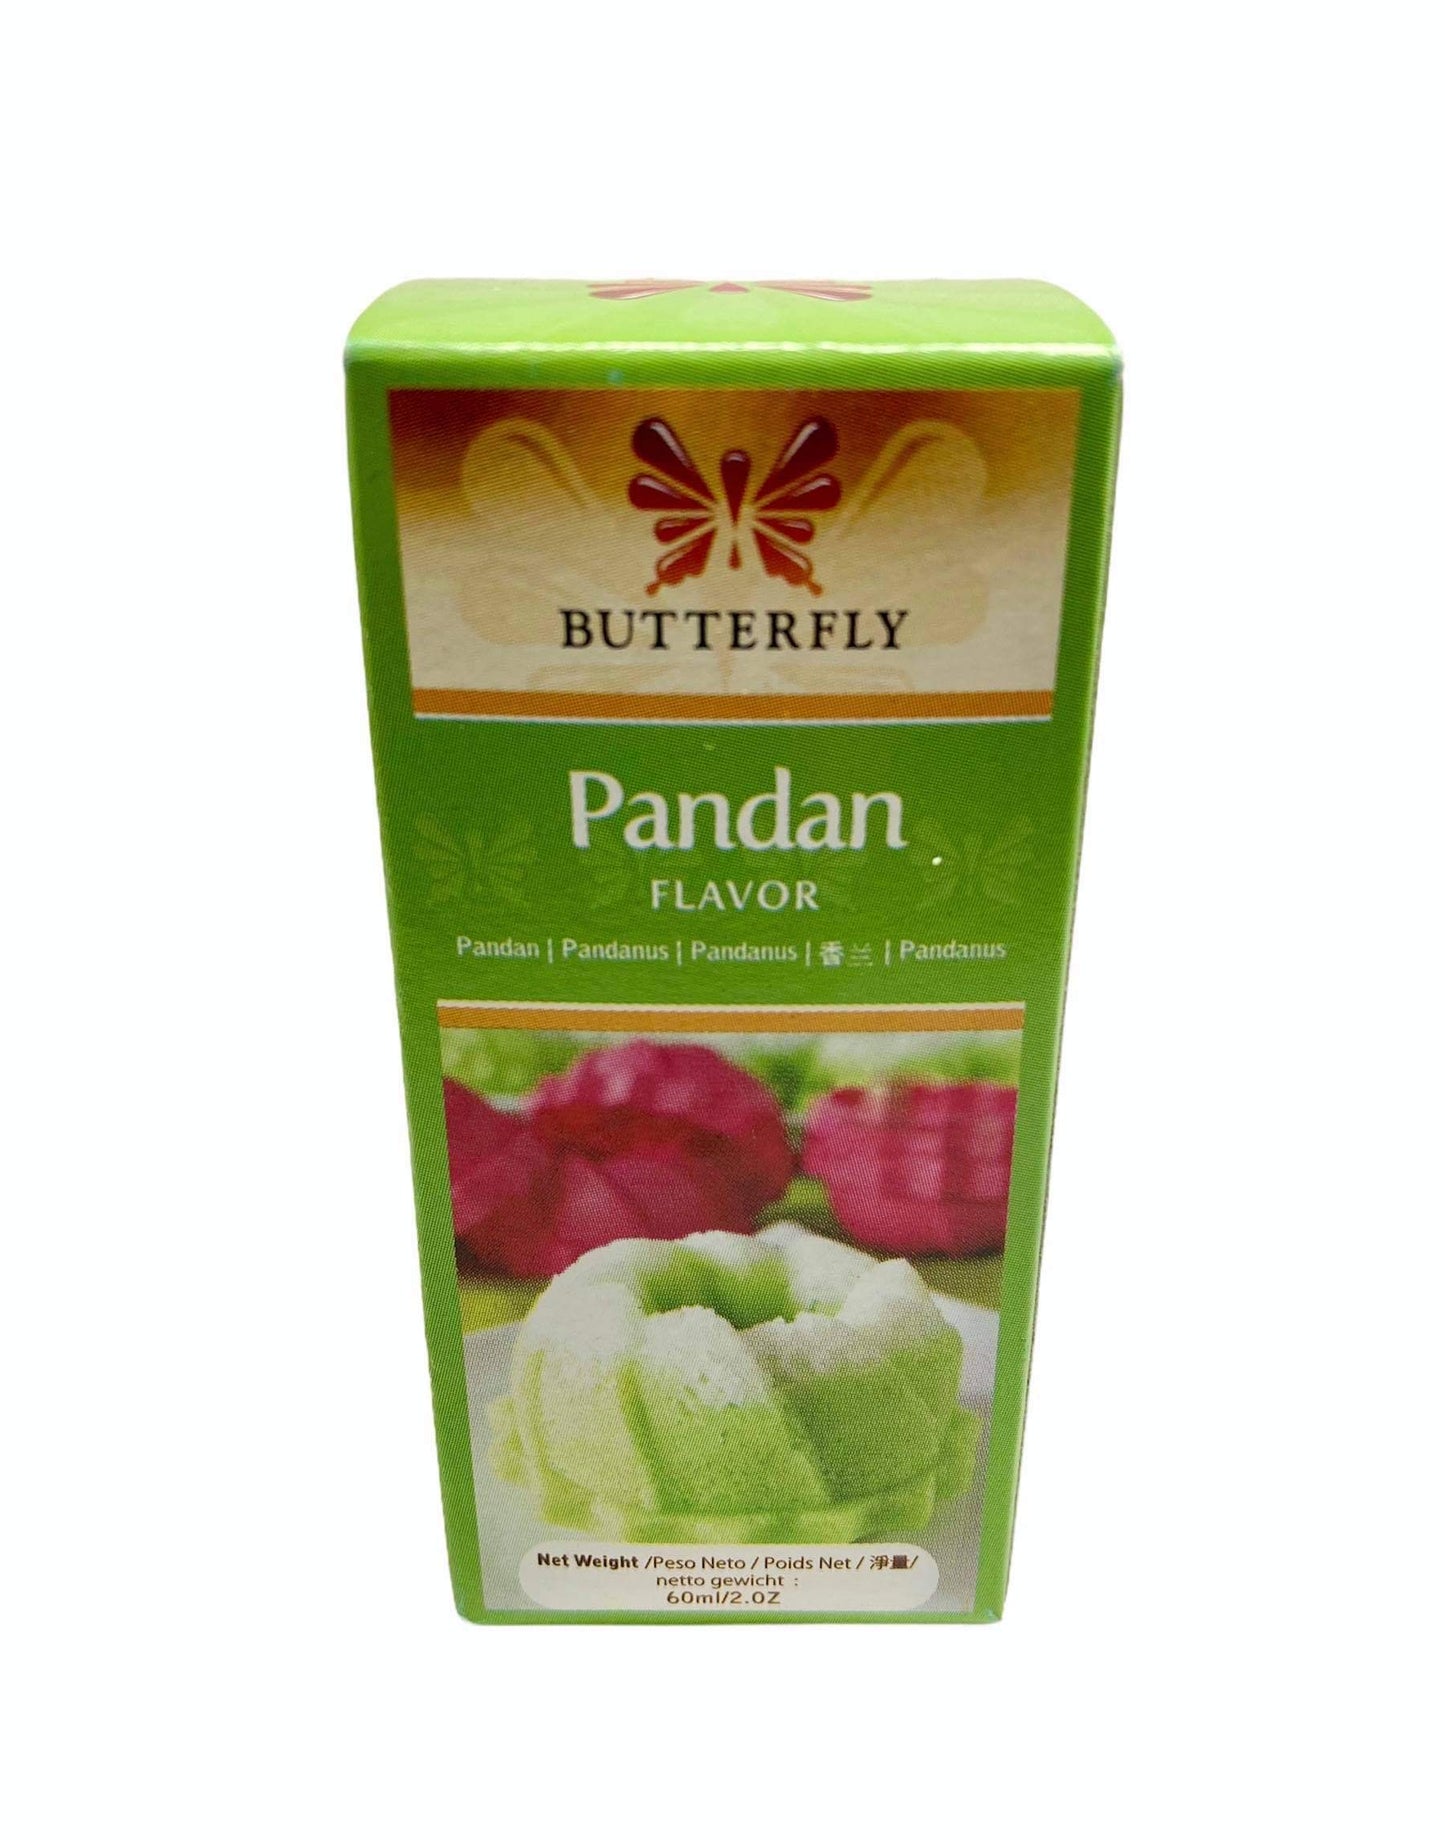 Butterfly Pandan Flavoring Extract 2 Oz. (60 ml)